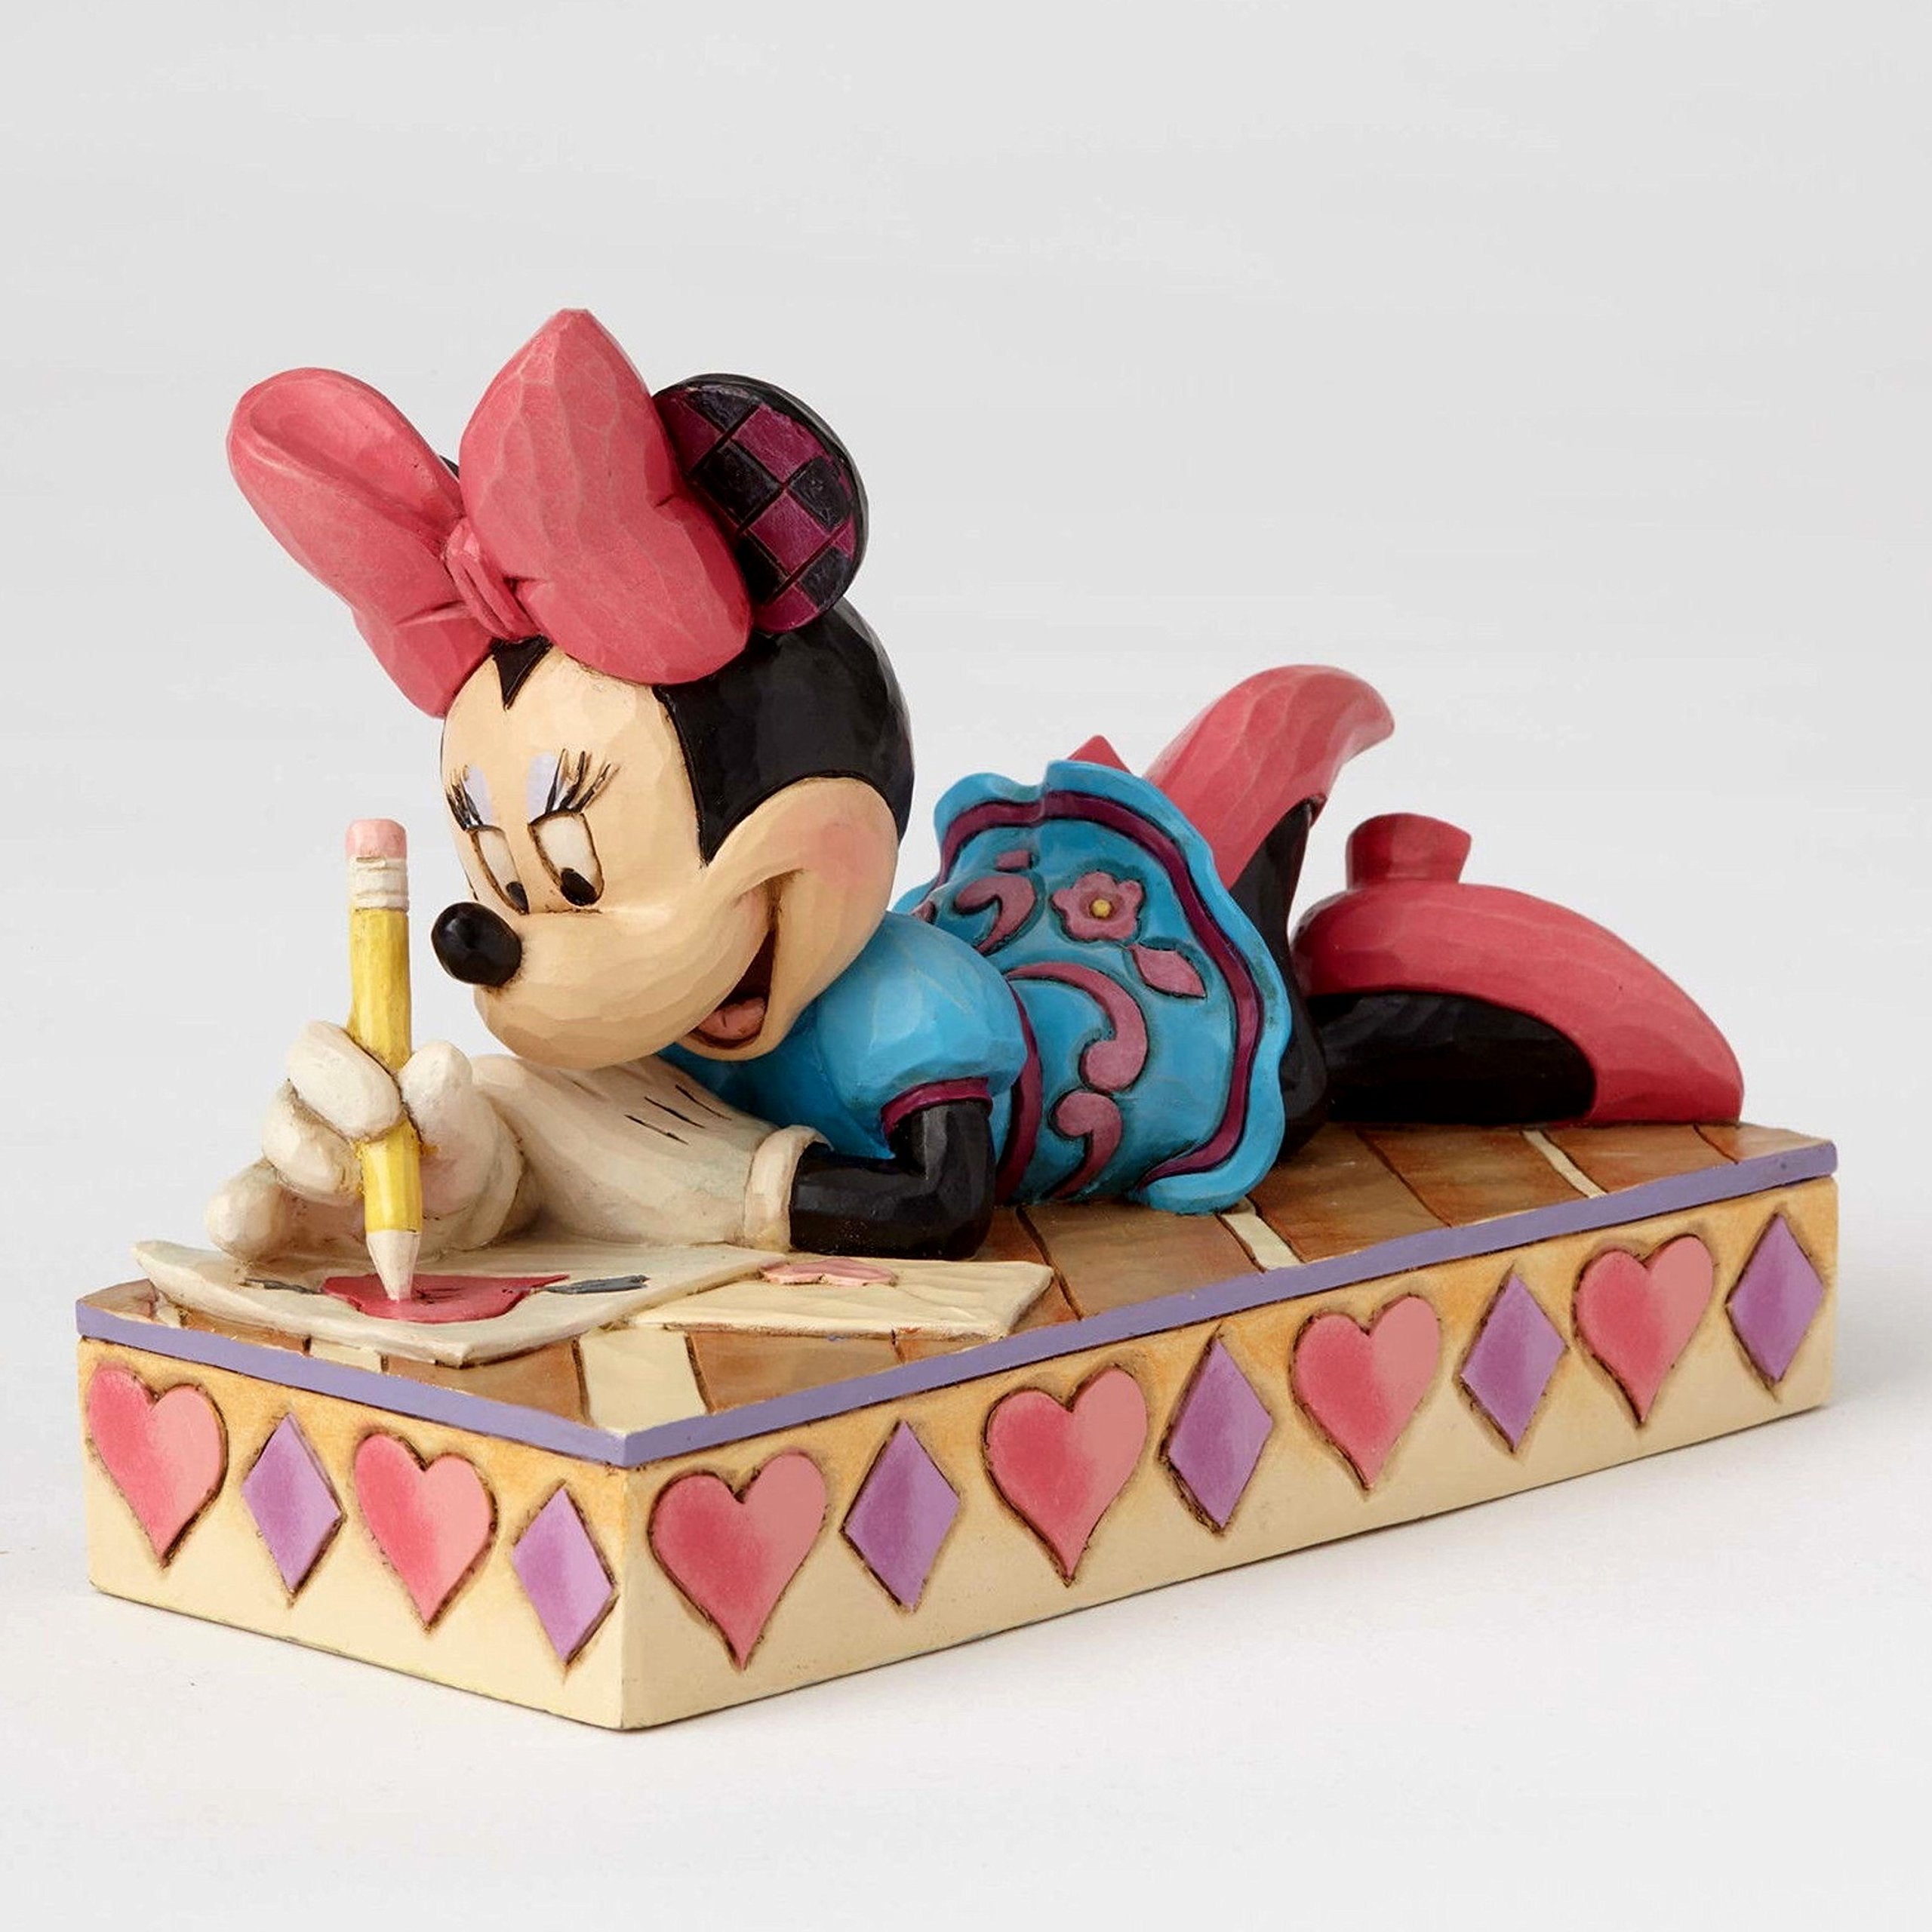 Disney Traditions by Jim Shore - Minnie Love Personality Pose